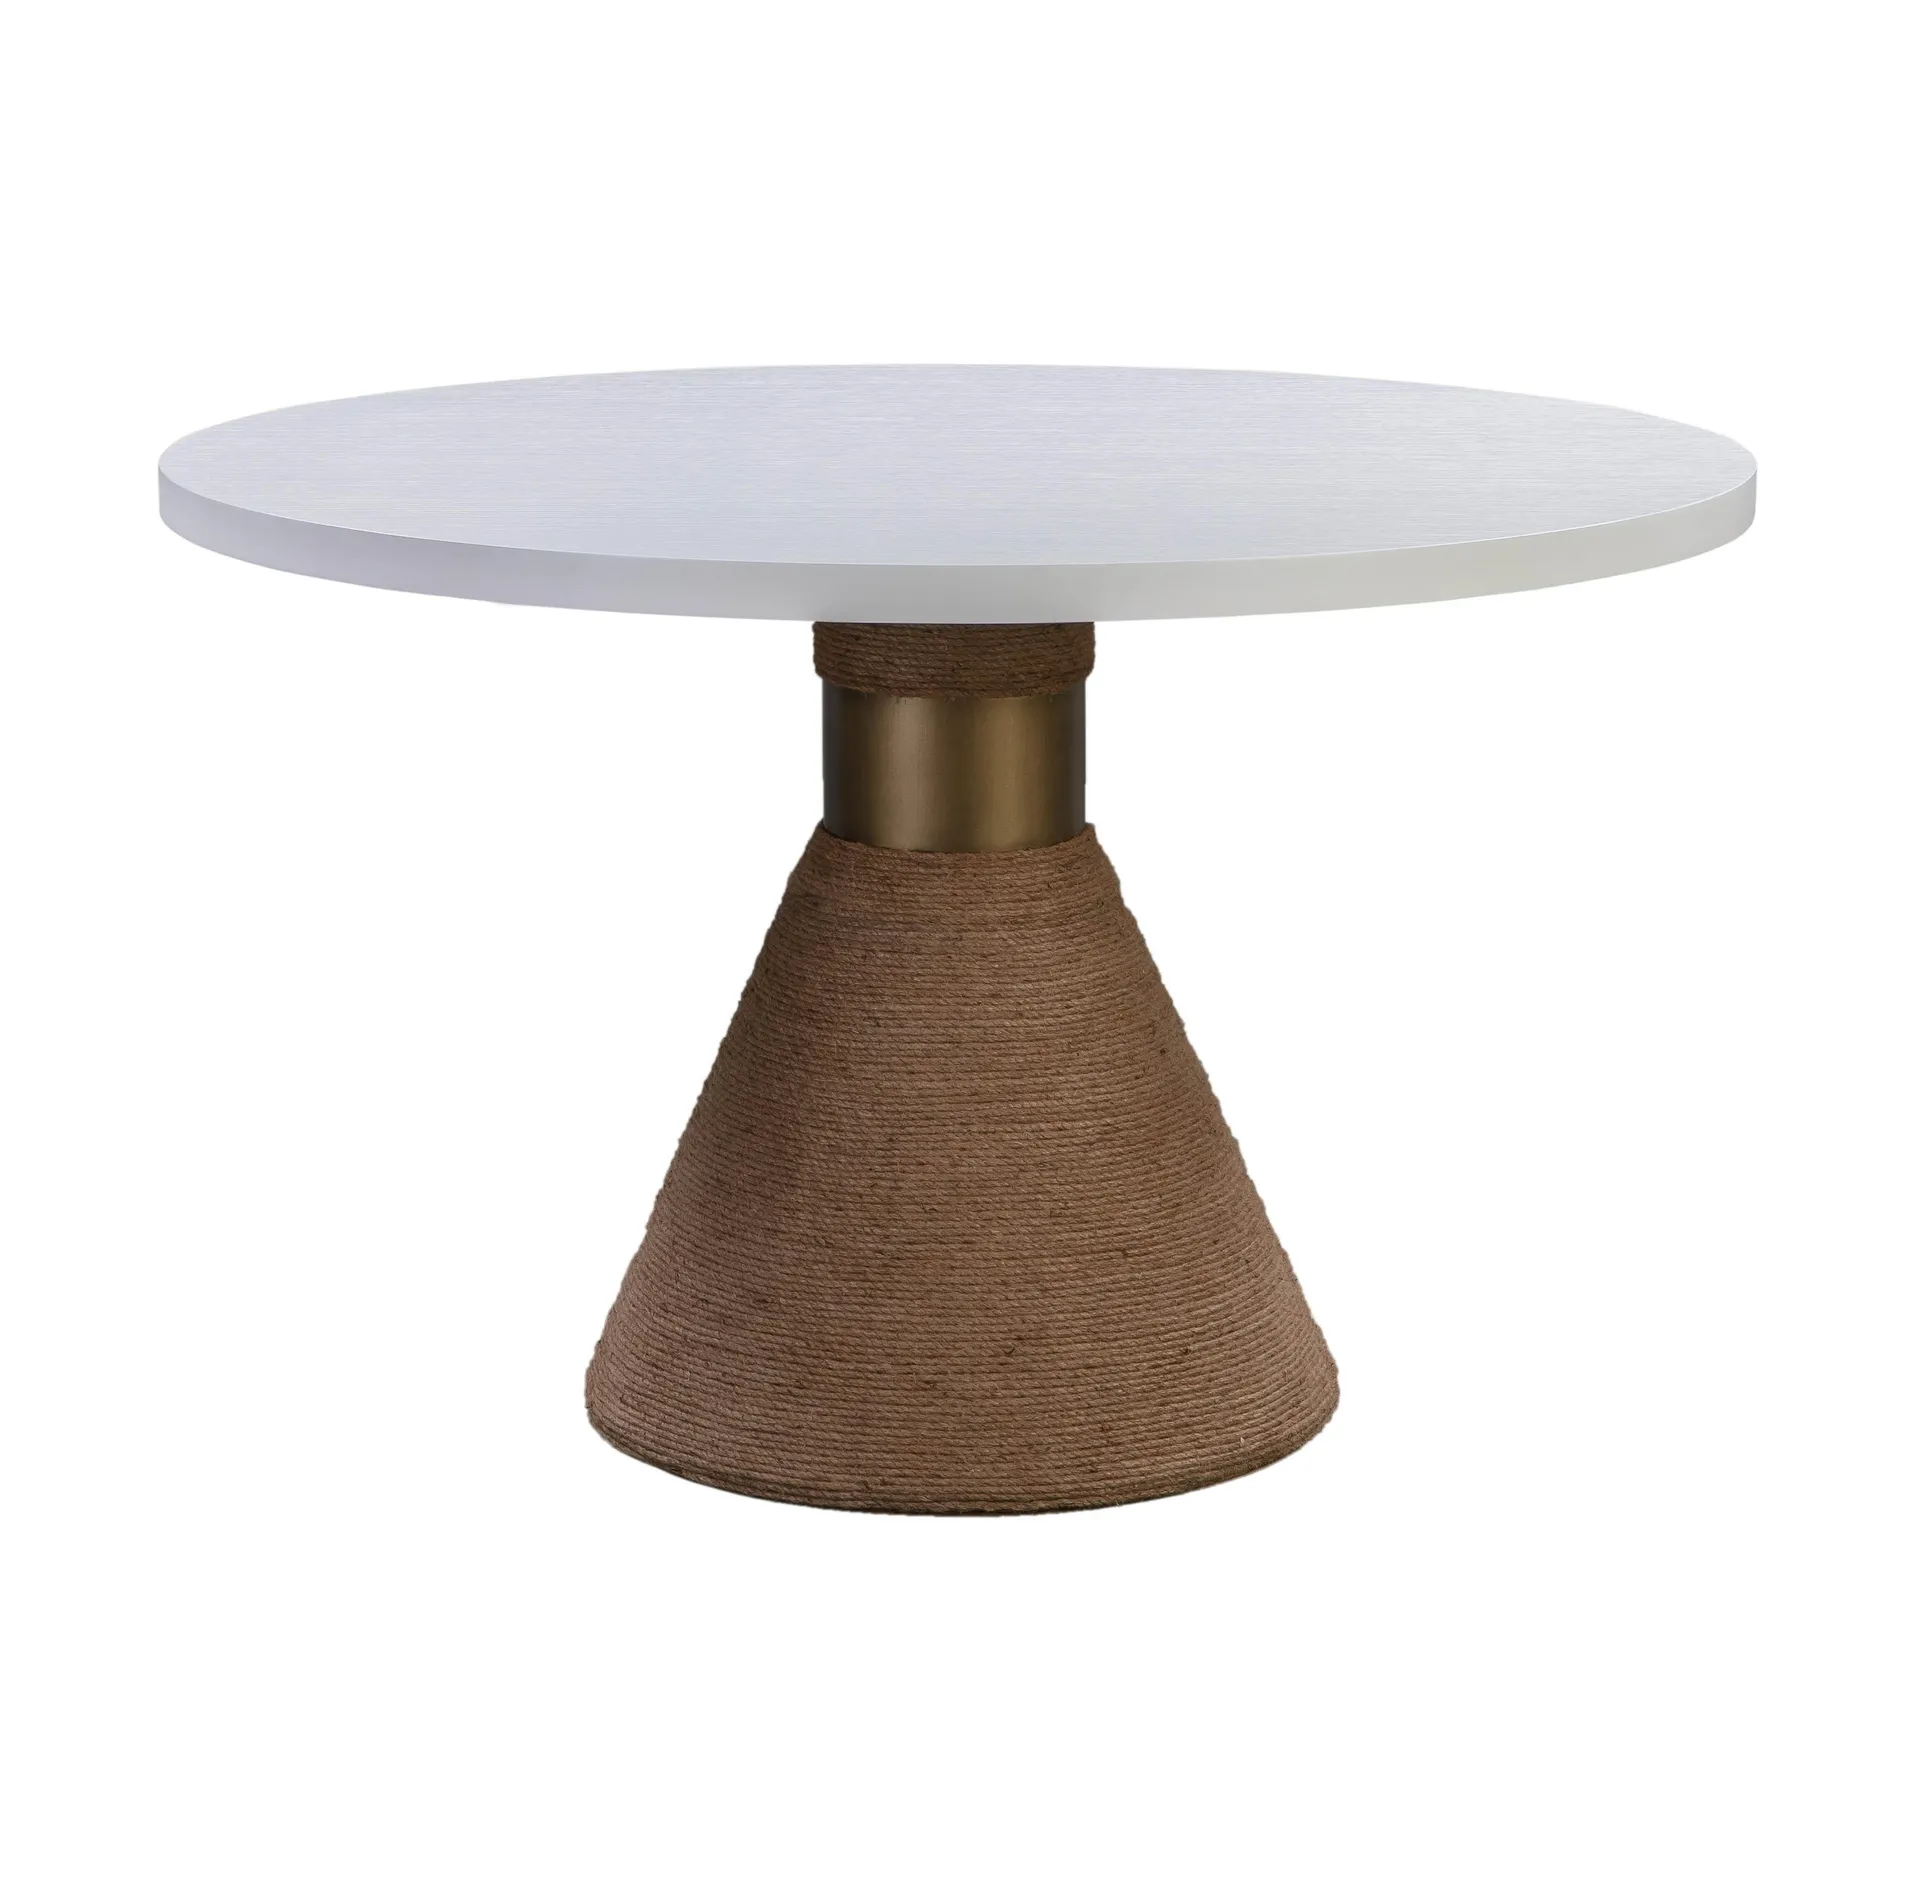 Rishi Rope 48" Round Dining Table